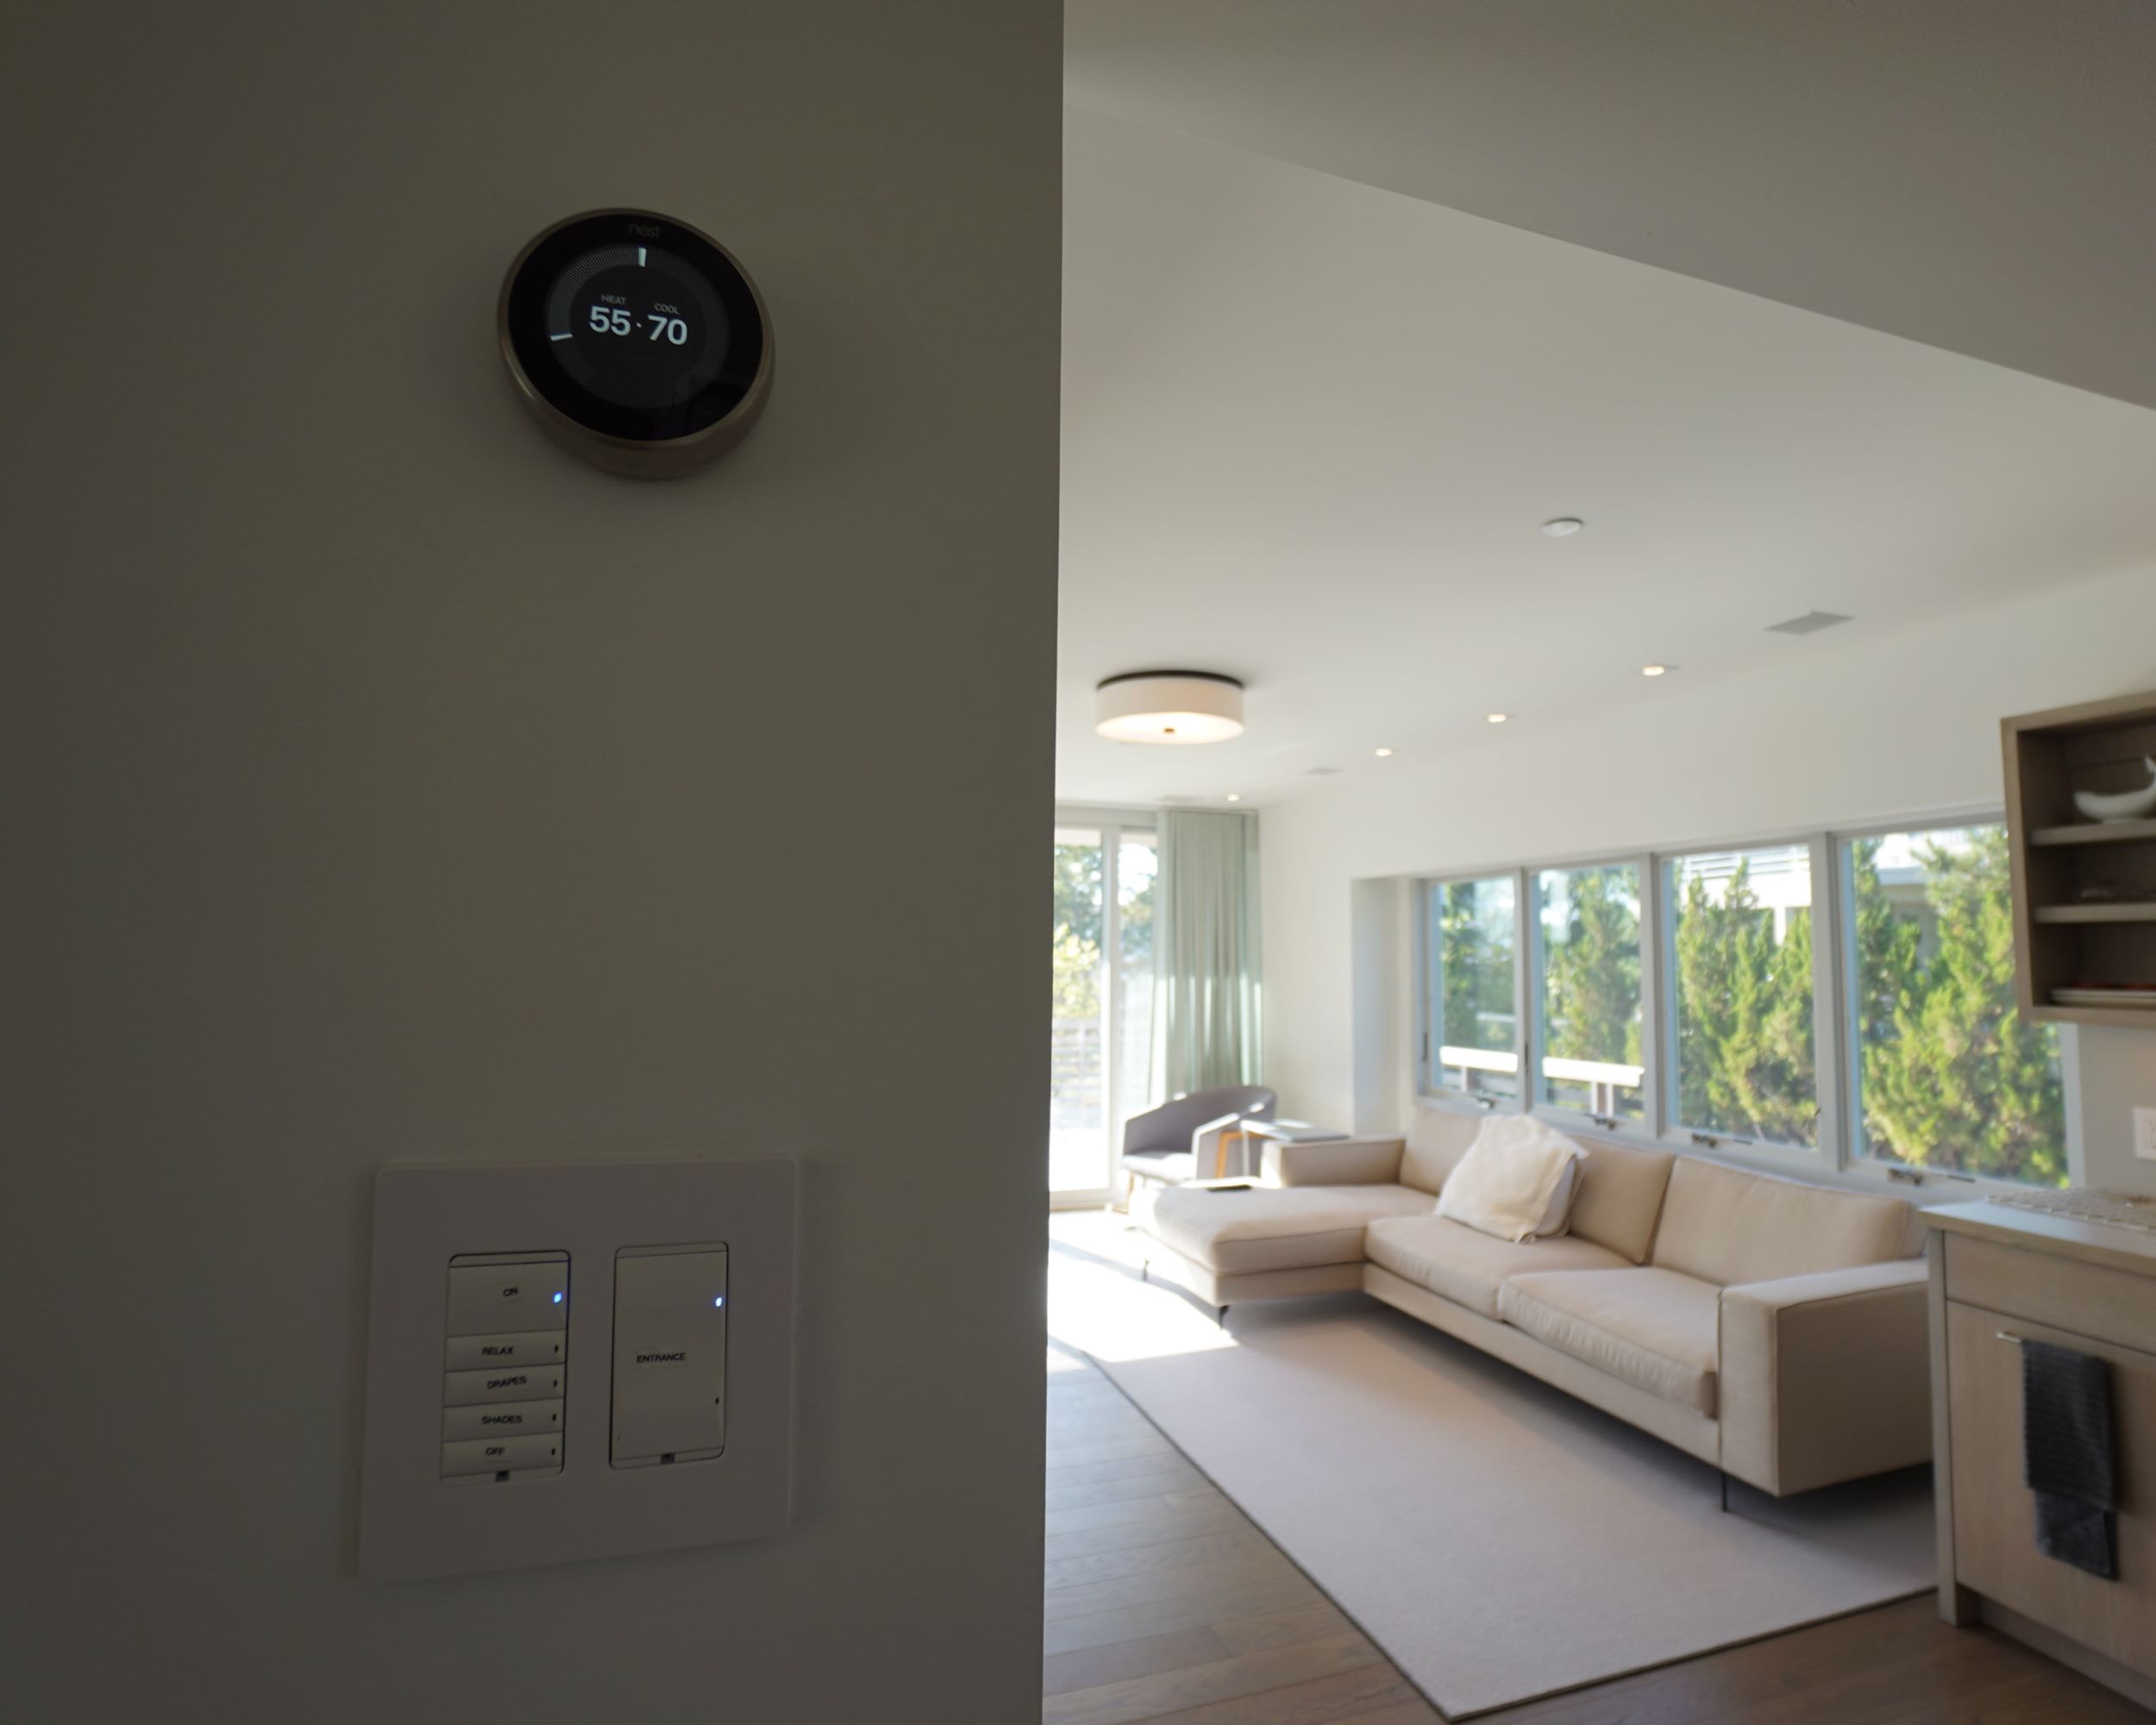 Home Automation in LBI